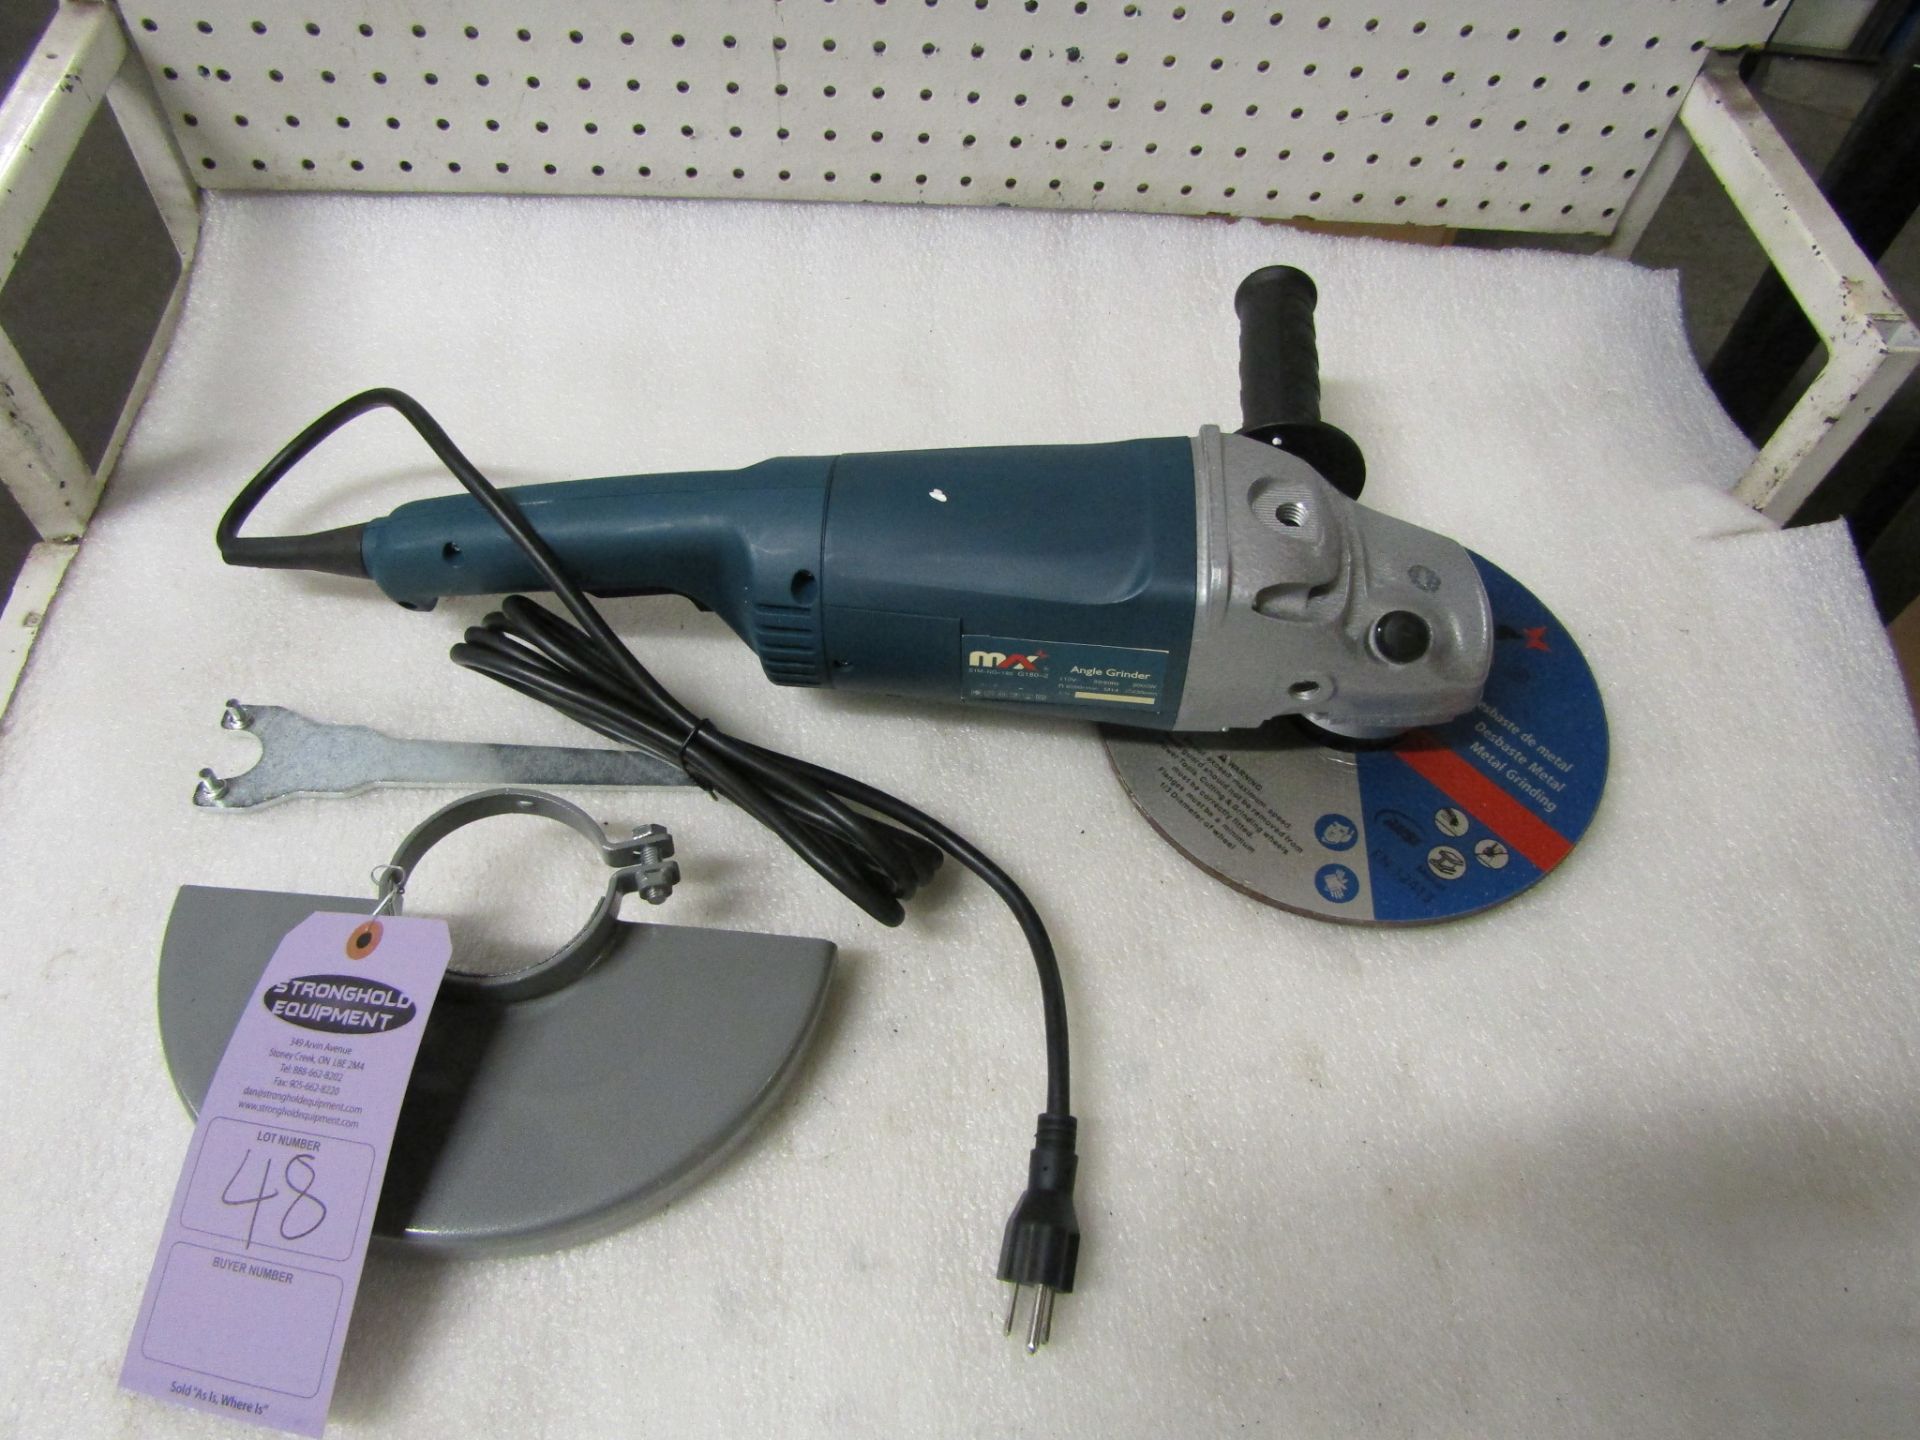 BRAND NEW Max 9" Angle Grinder model G180